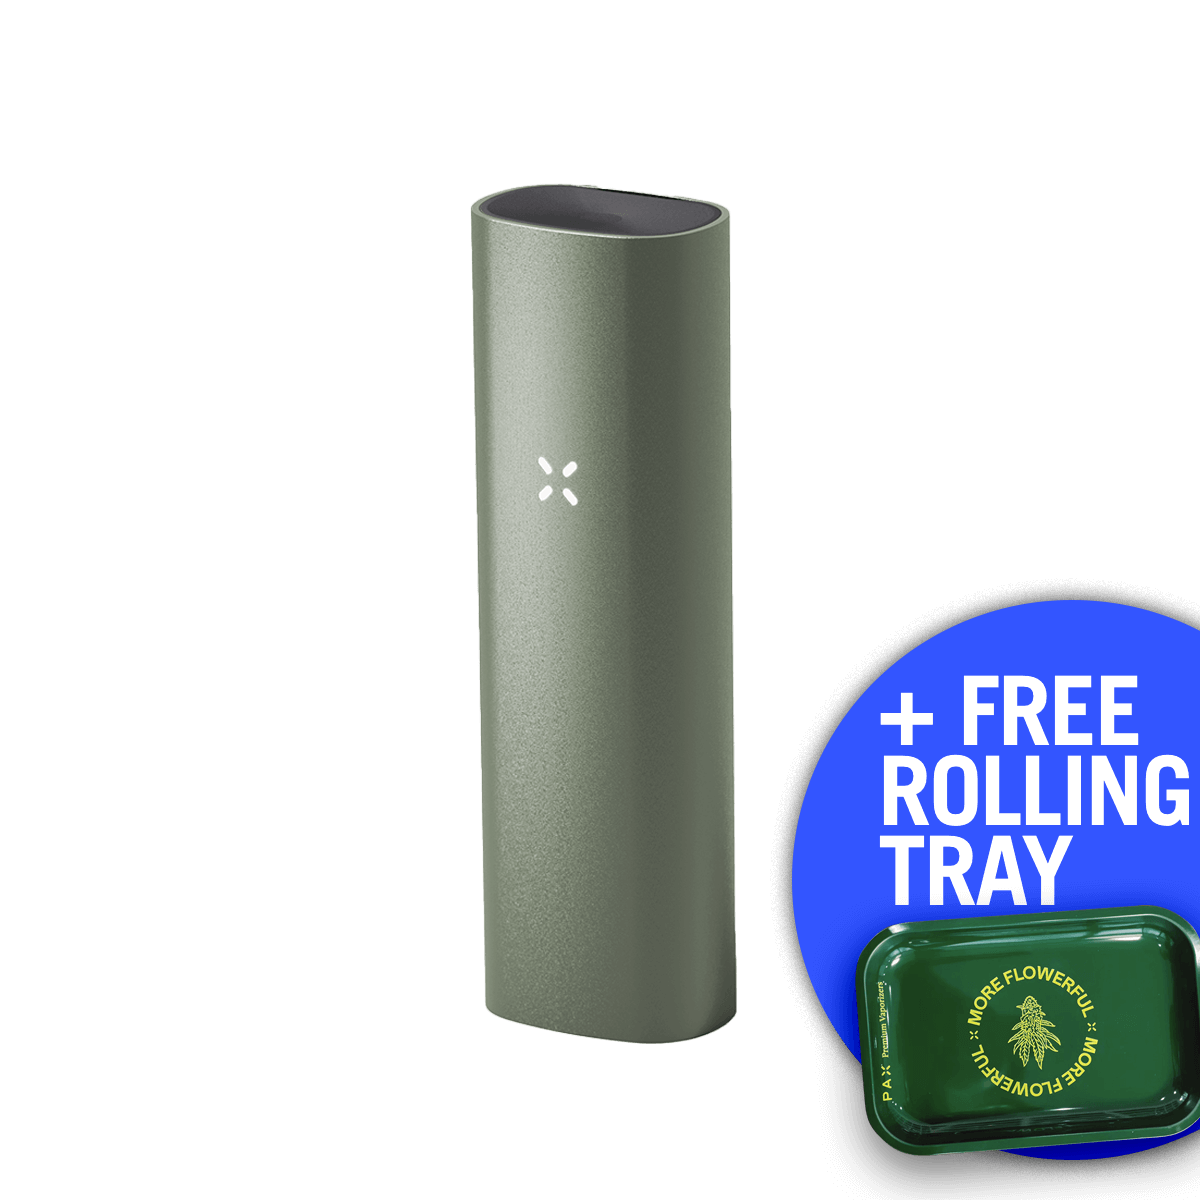 PAX 3 - Device Only